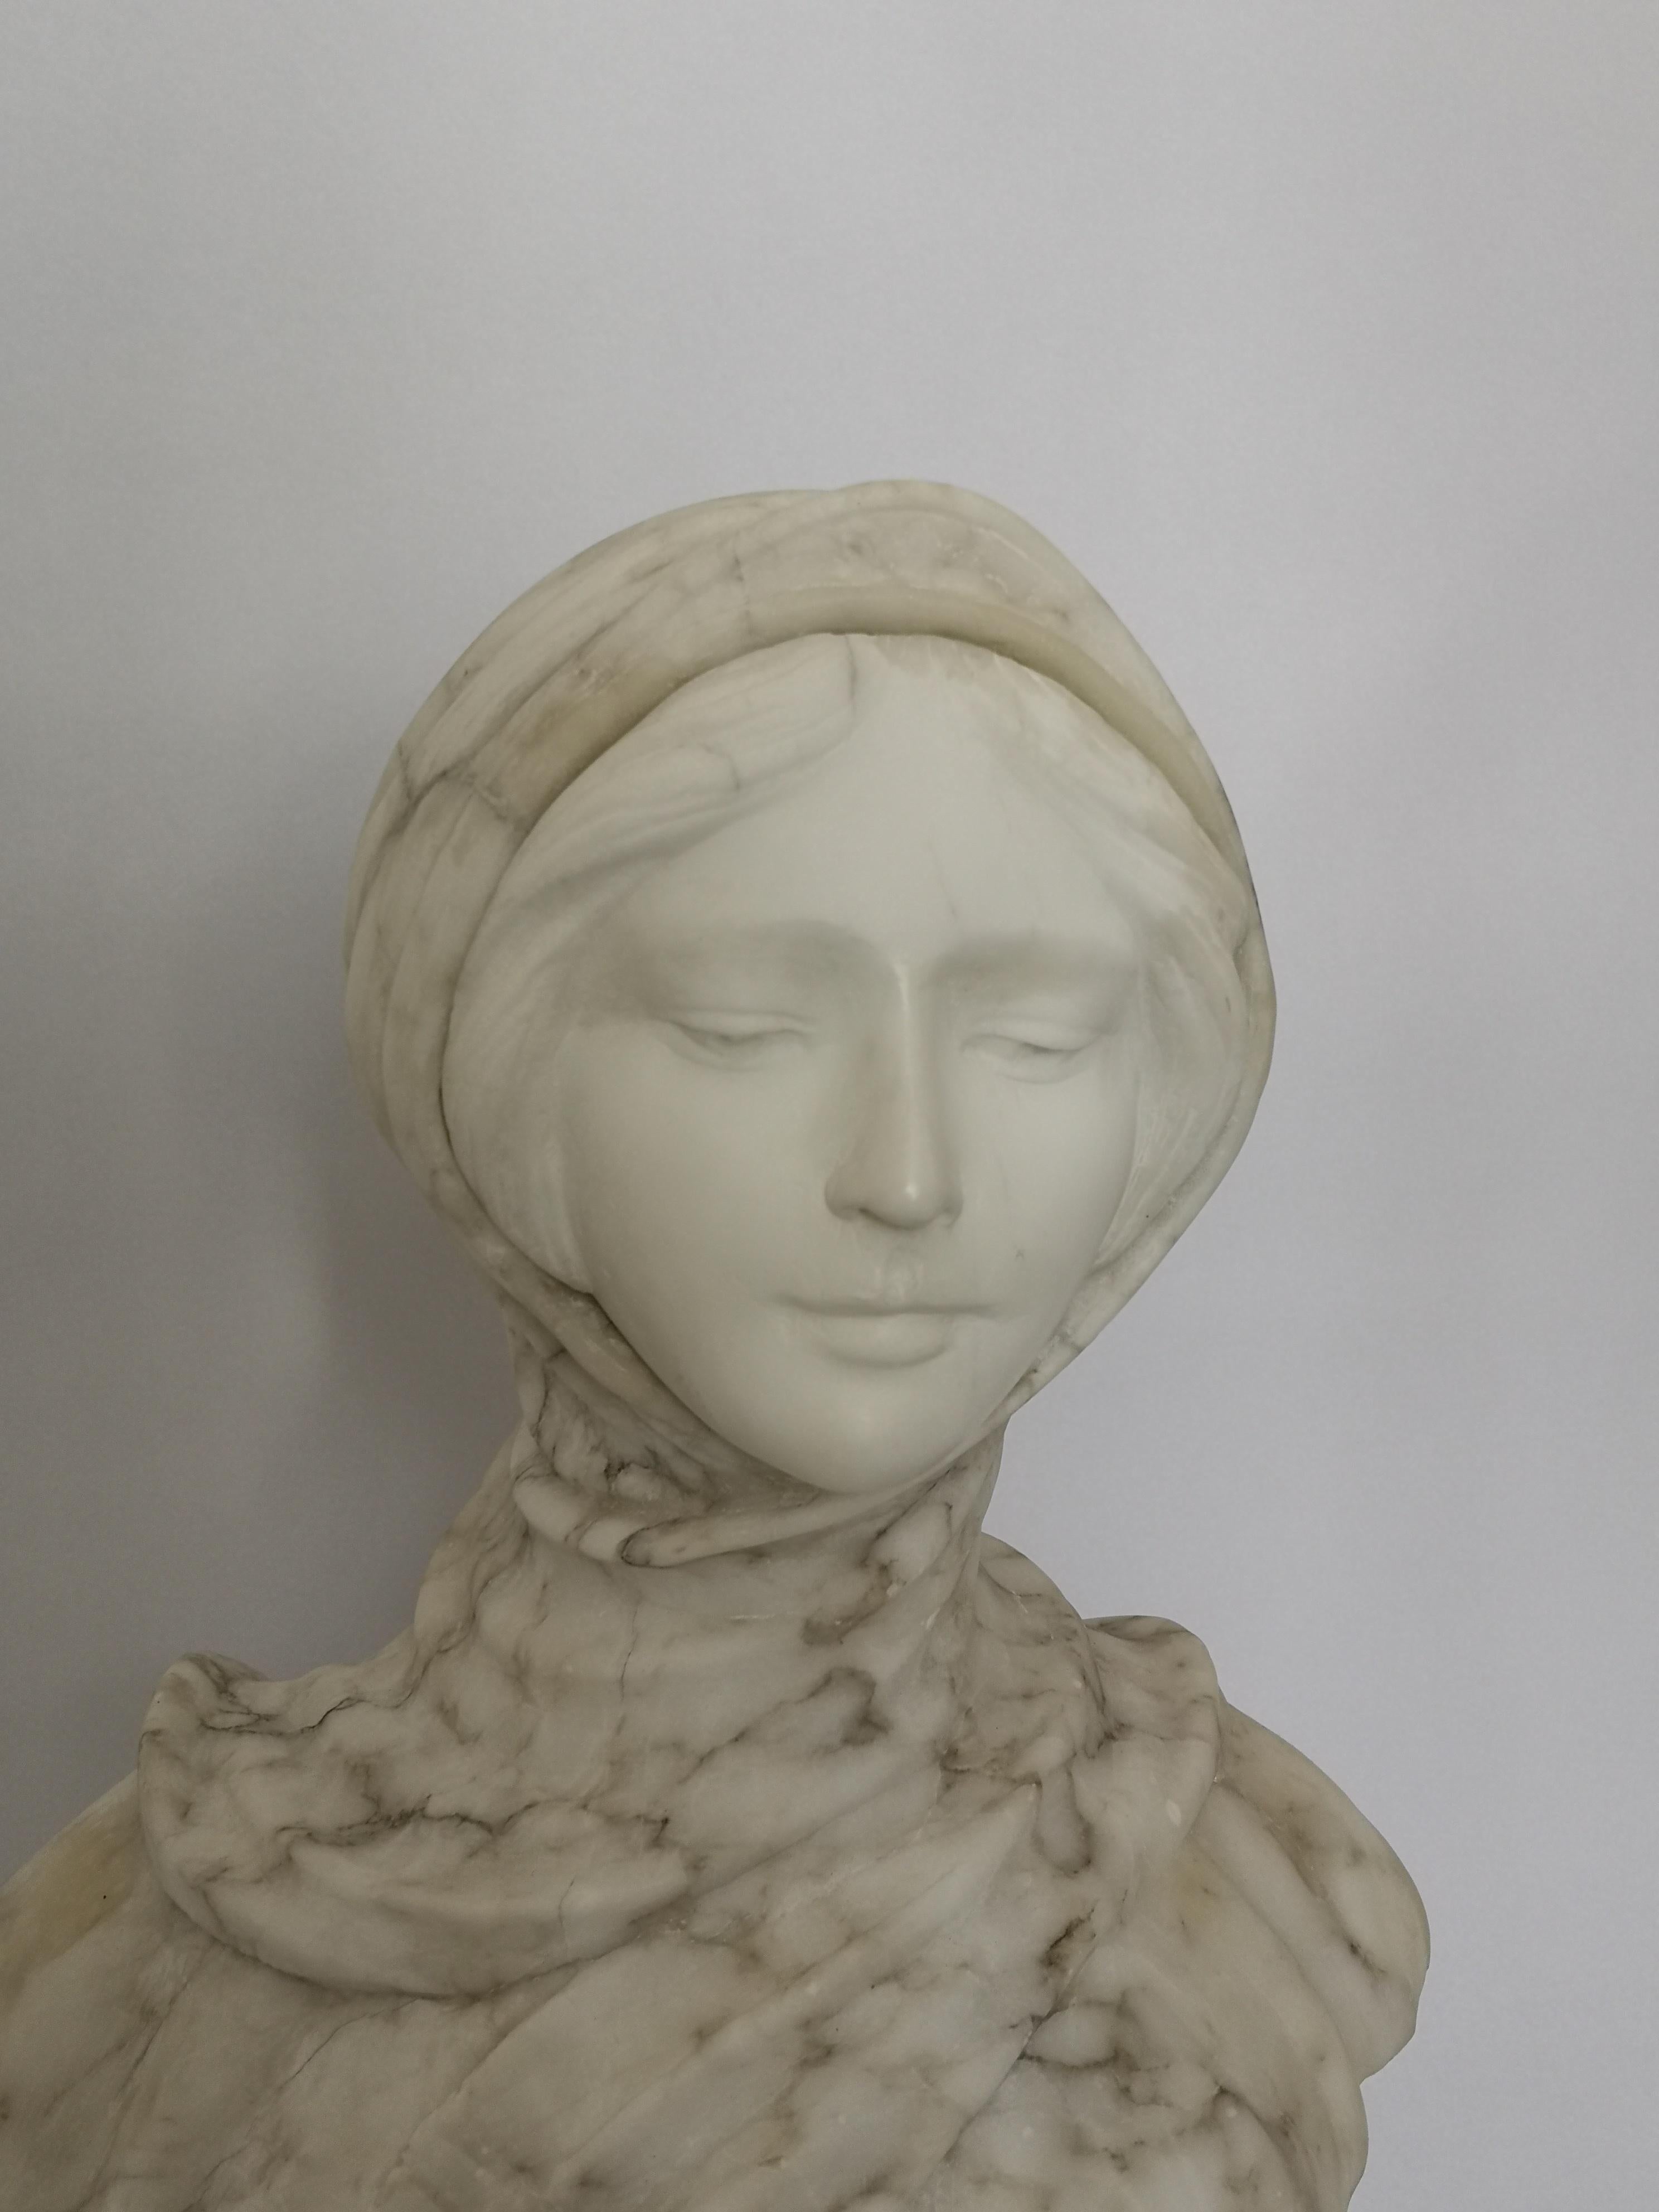 A French marble bust of a girl, her hair wrapped in a headscarf and her eyes looking downwards. Her scarf in white/grey veined marble with a white marble face.
Indistinctly signed.
French, circa 1900.